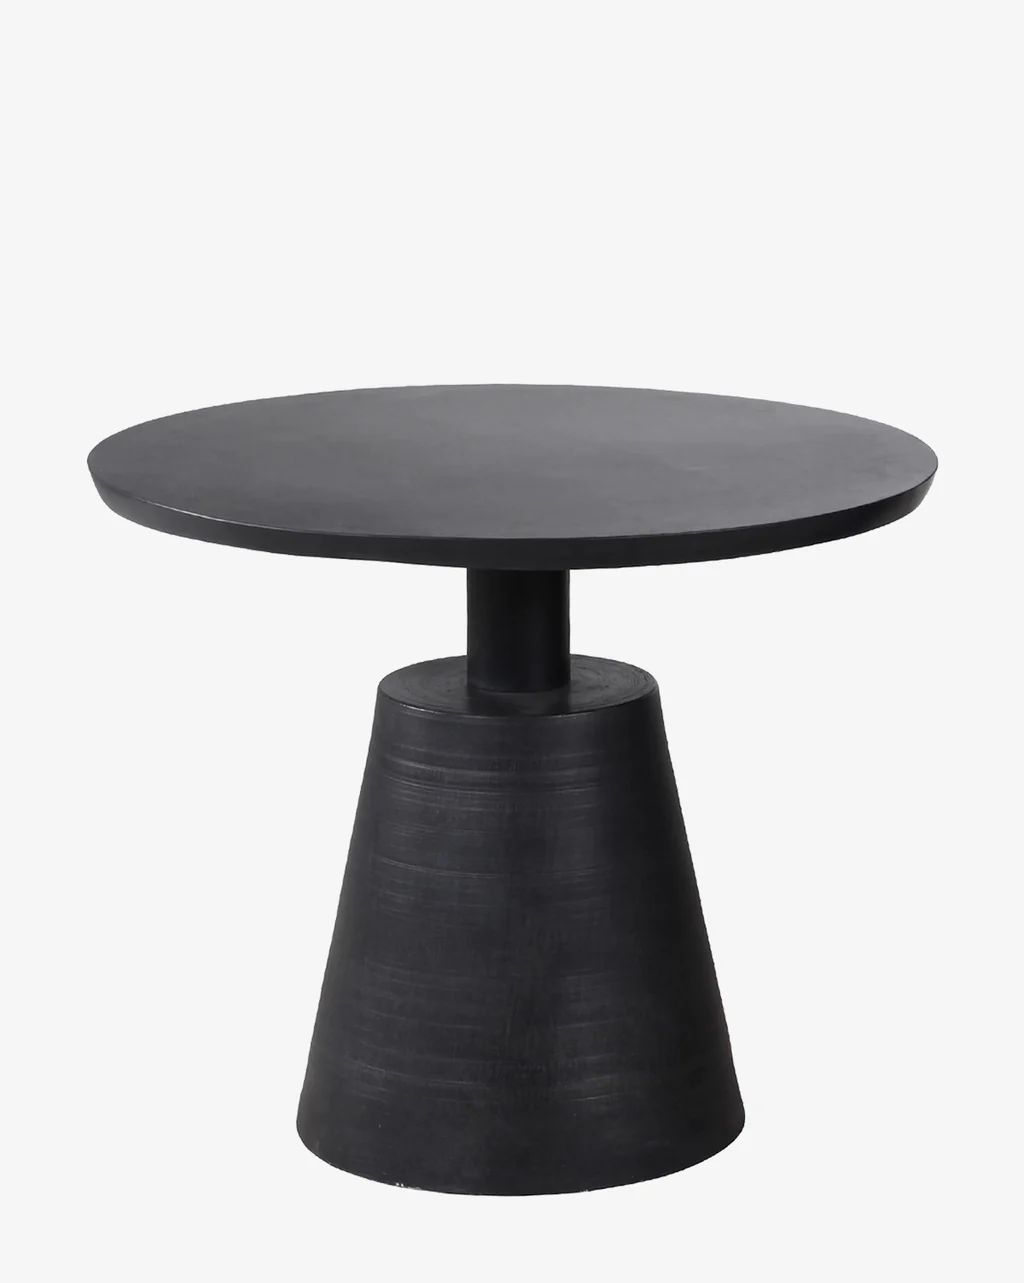 Domino Dining Table | McGee & Co.